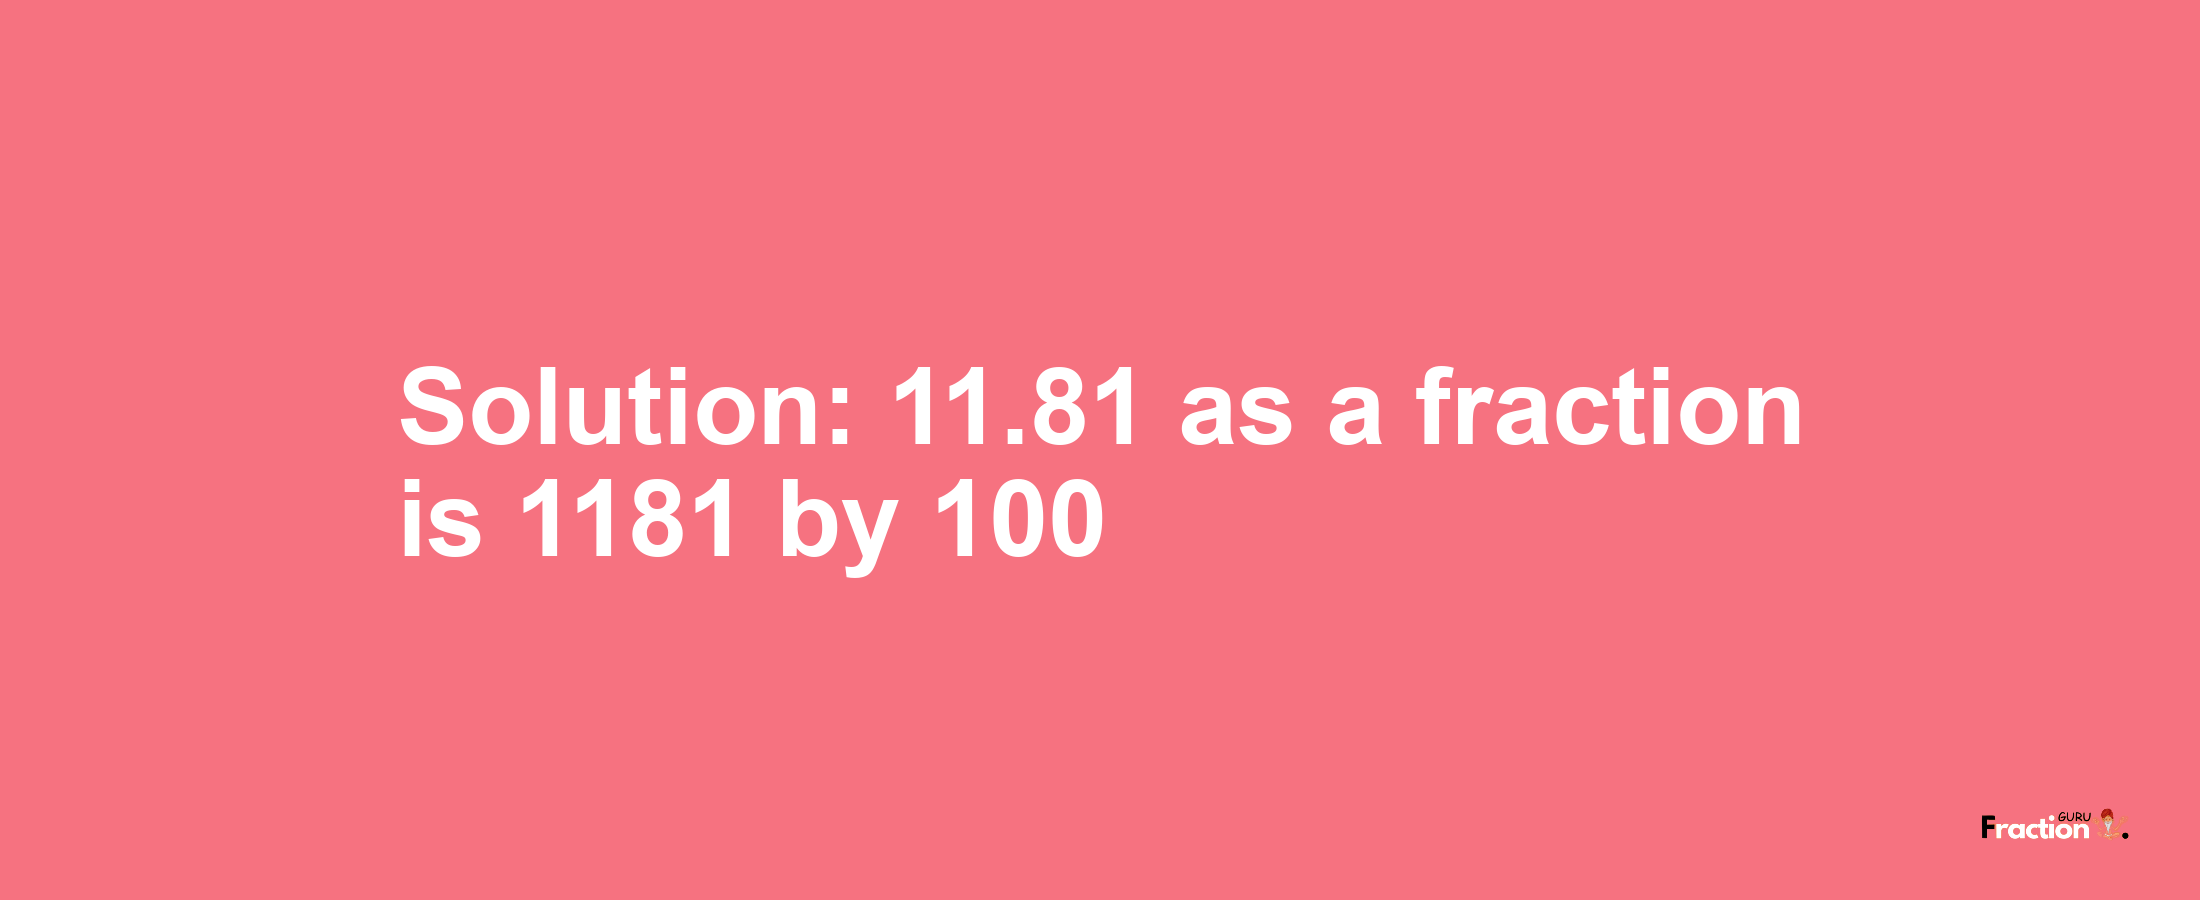 Solution:11.81 as a fraction is 1181/100